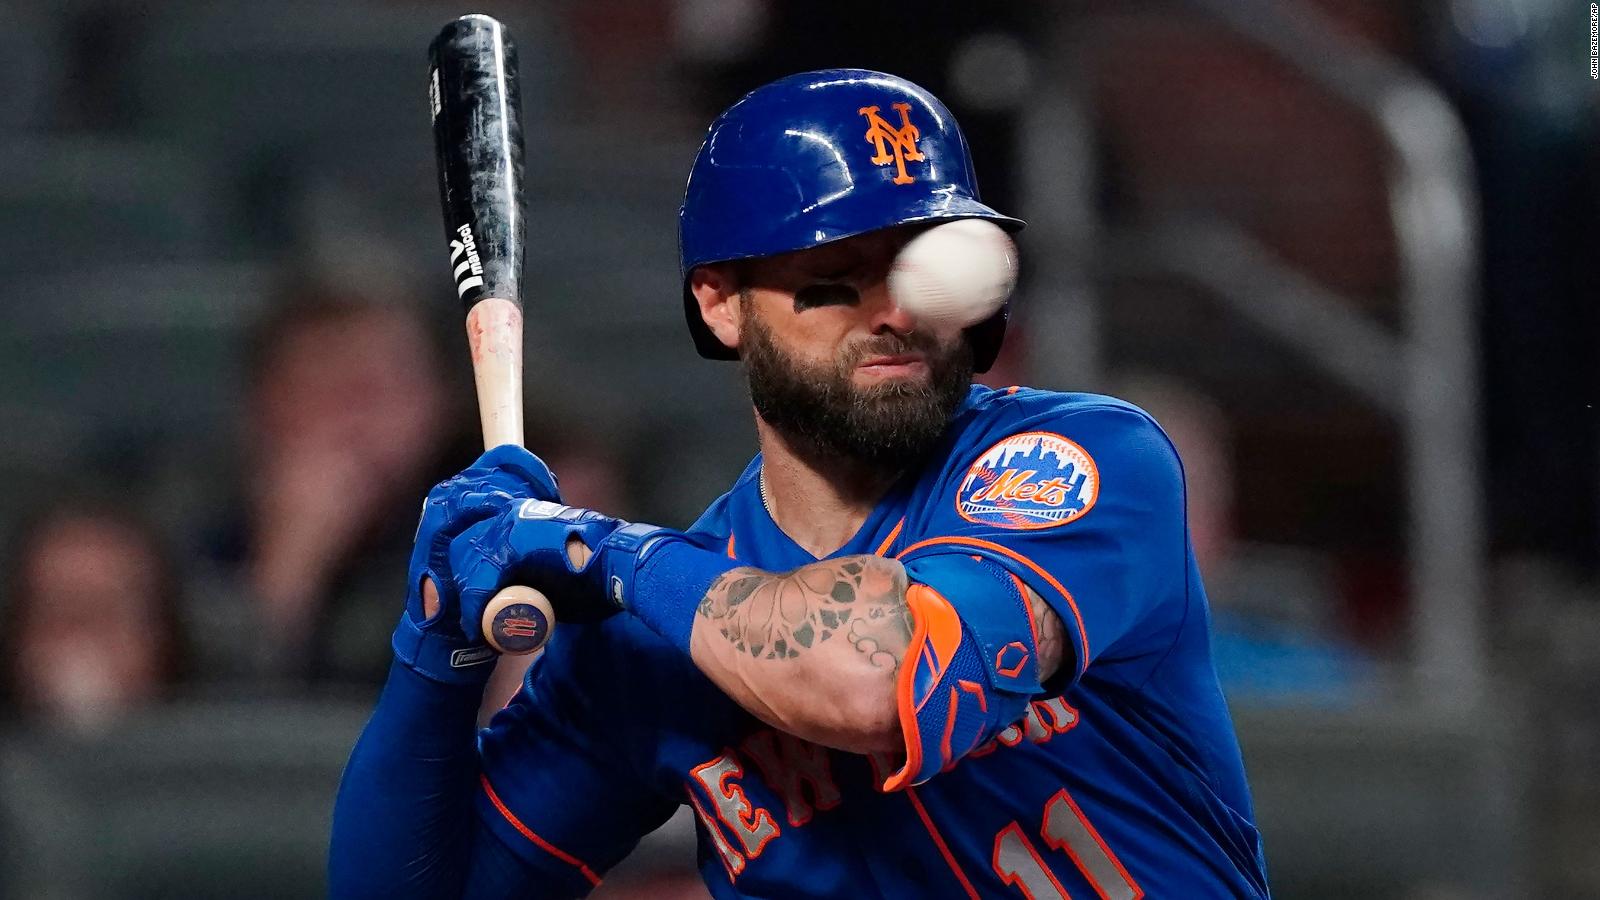 Kevin Pillar New York Mets player suffers nasal fractures after